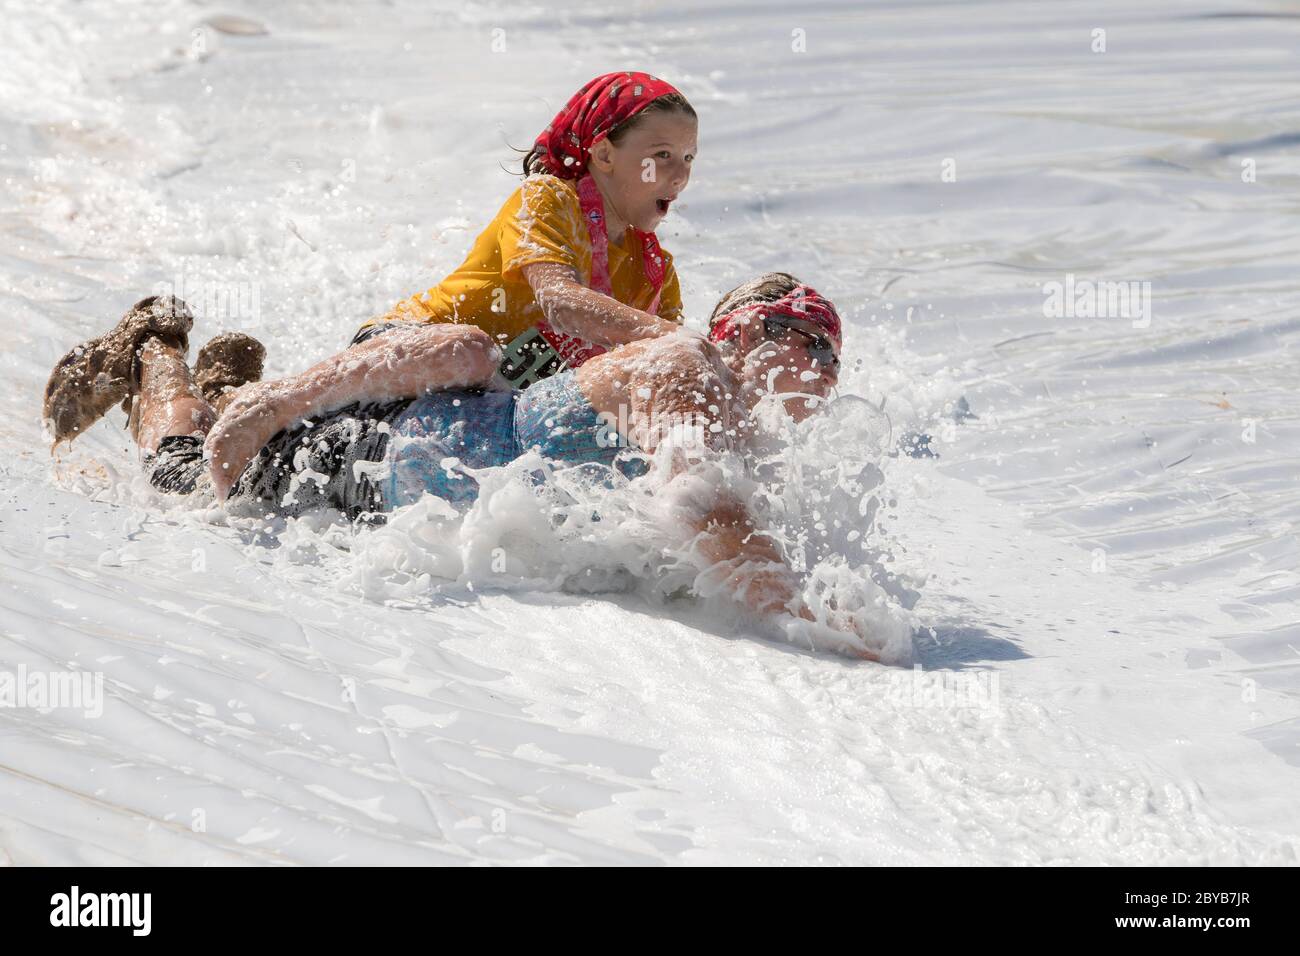 Poley Mountain, New Brunswick, Canada - June 10, 2017: Participating in the annual fundraiser 'Mud Run For Heart'. A woman and child slide down a foam Stock Photo